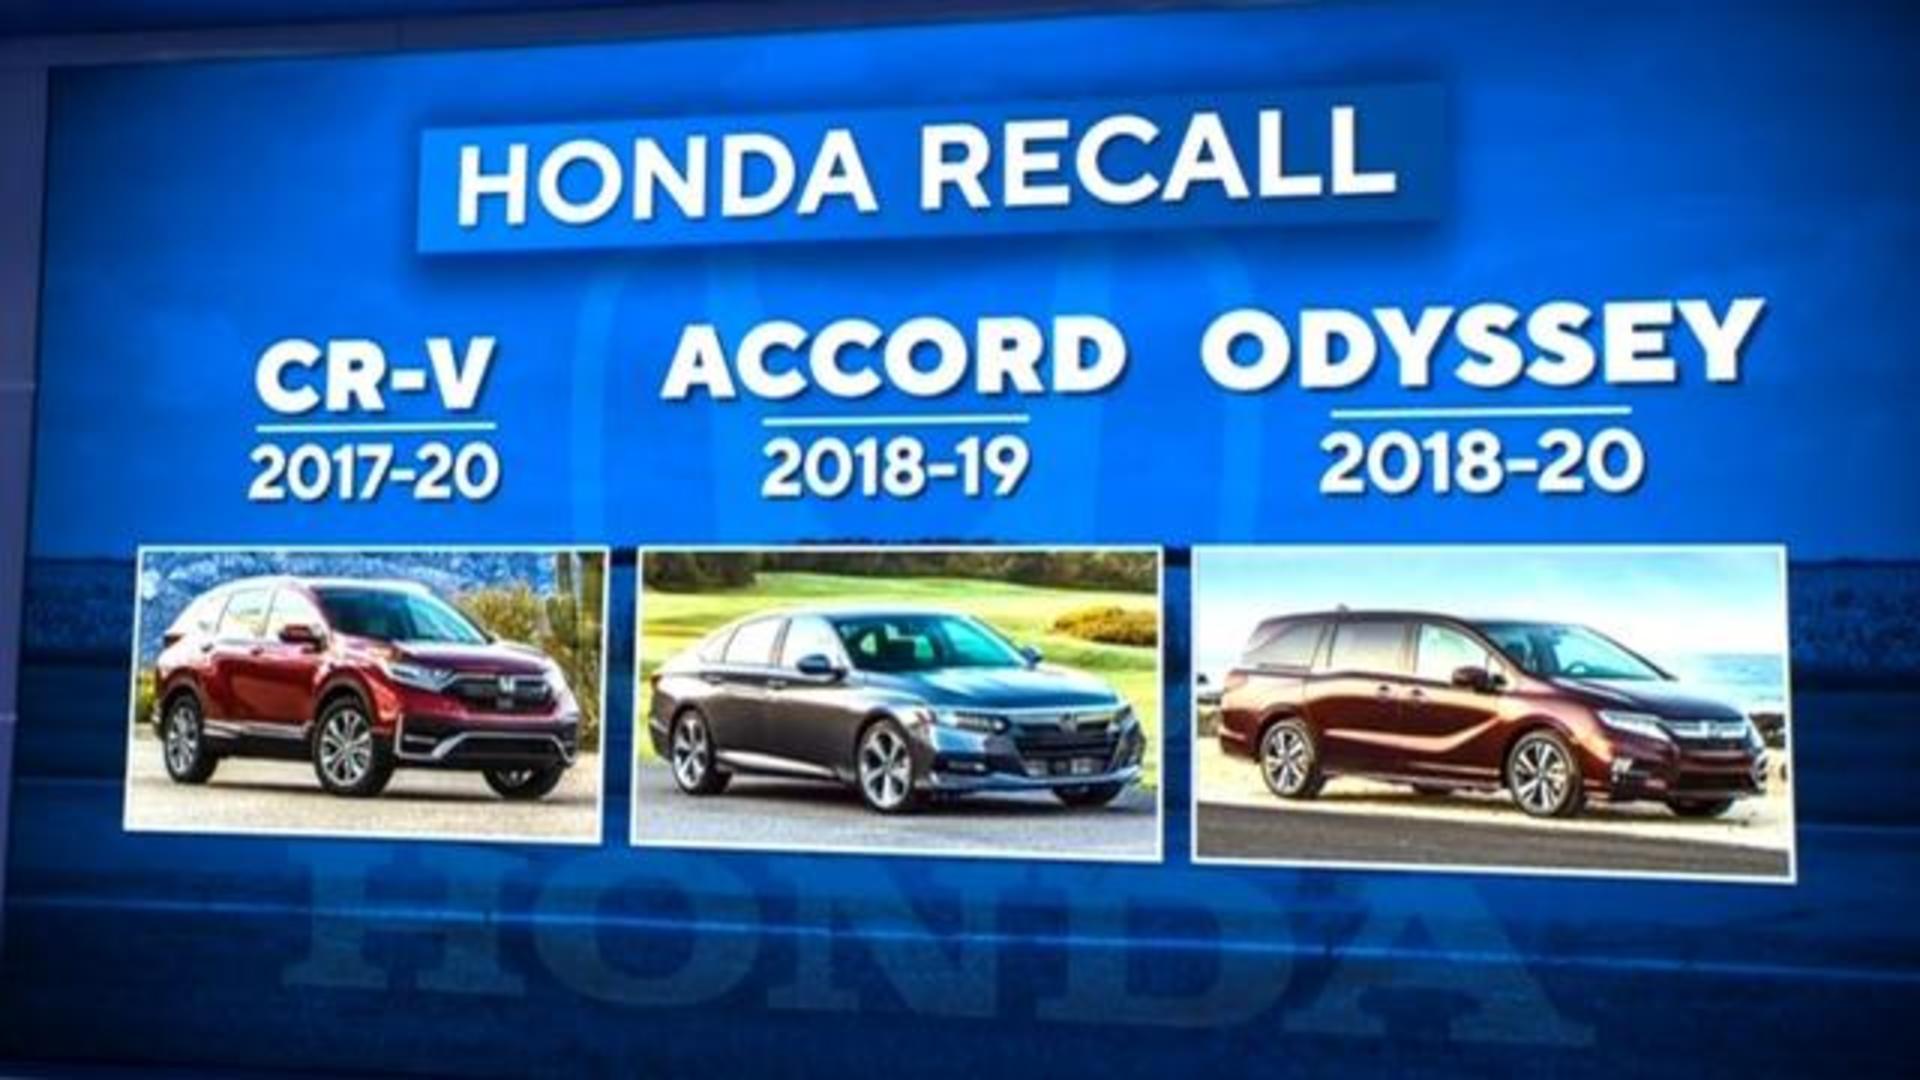 Honda recalls more than 303,000 Accords and HR-V over seat belt safety